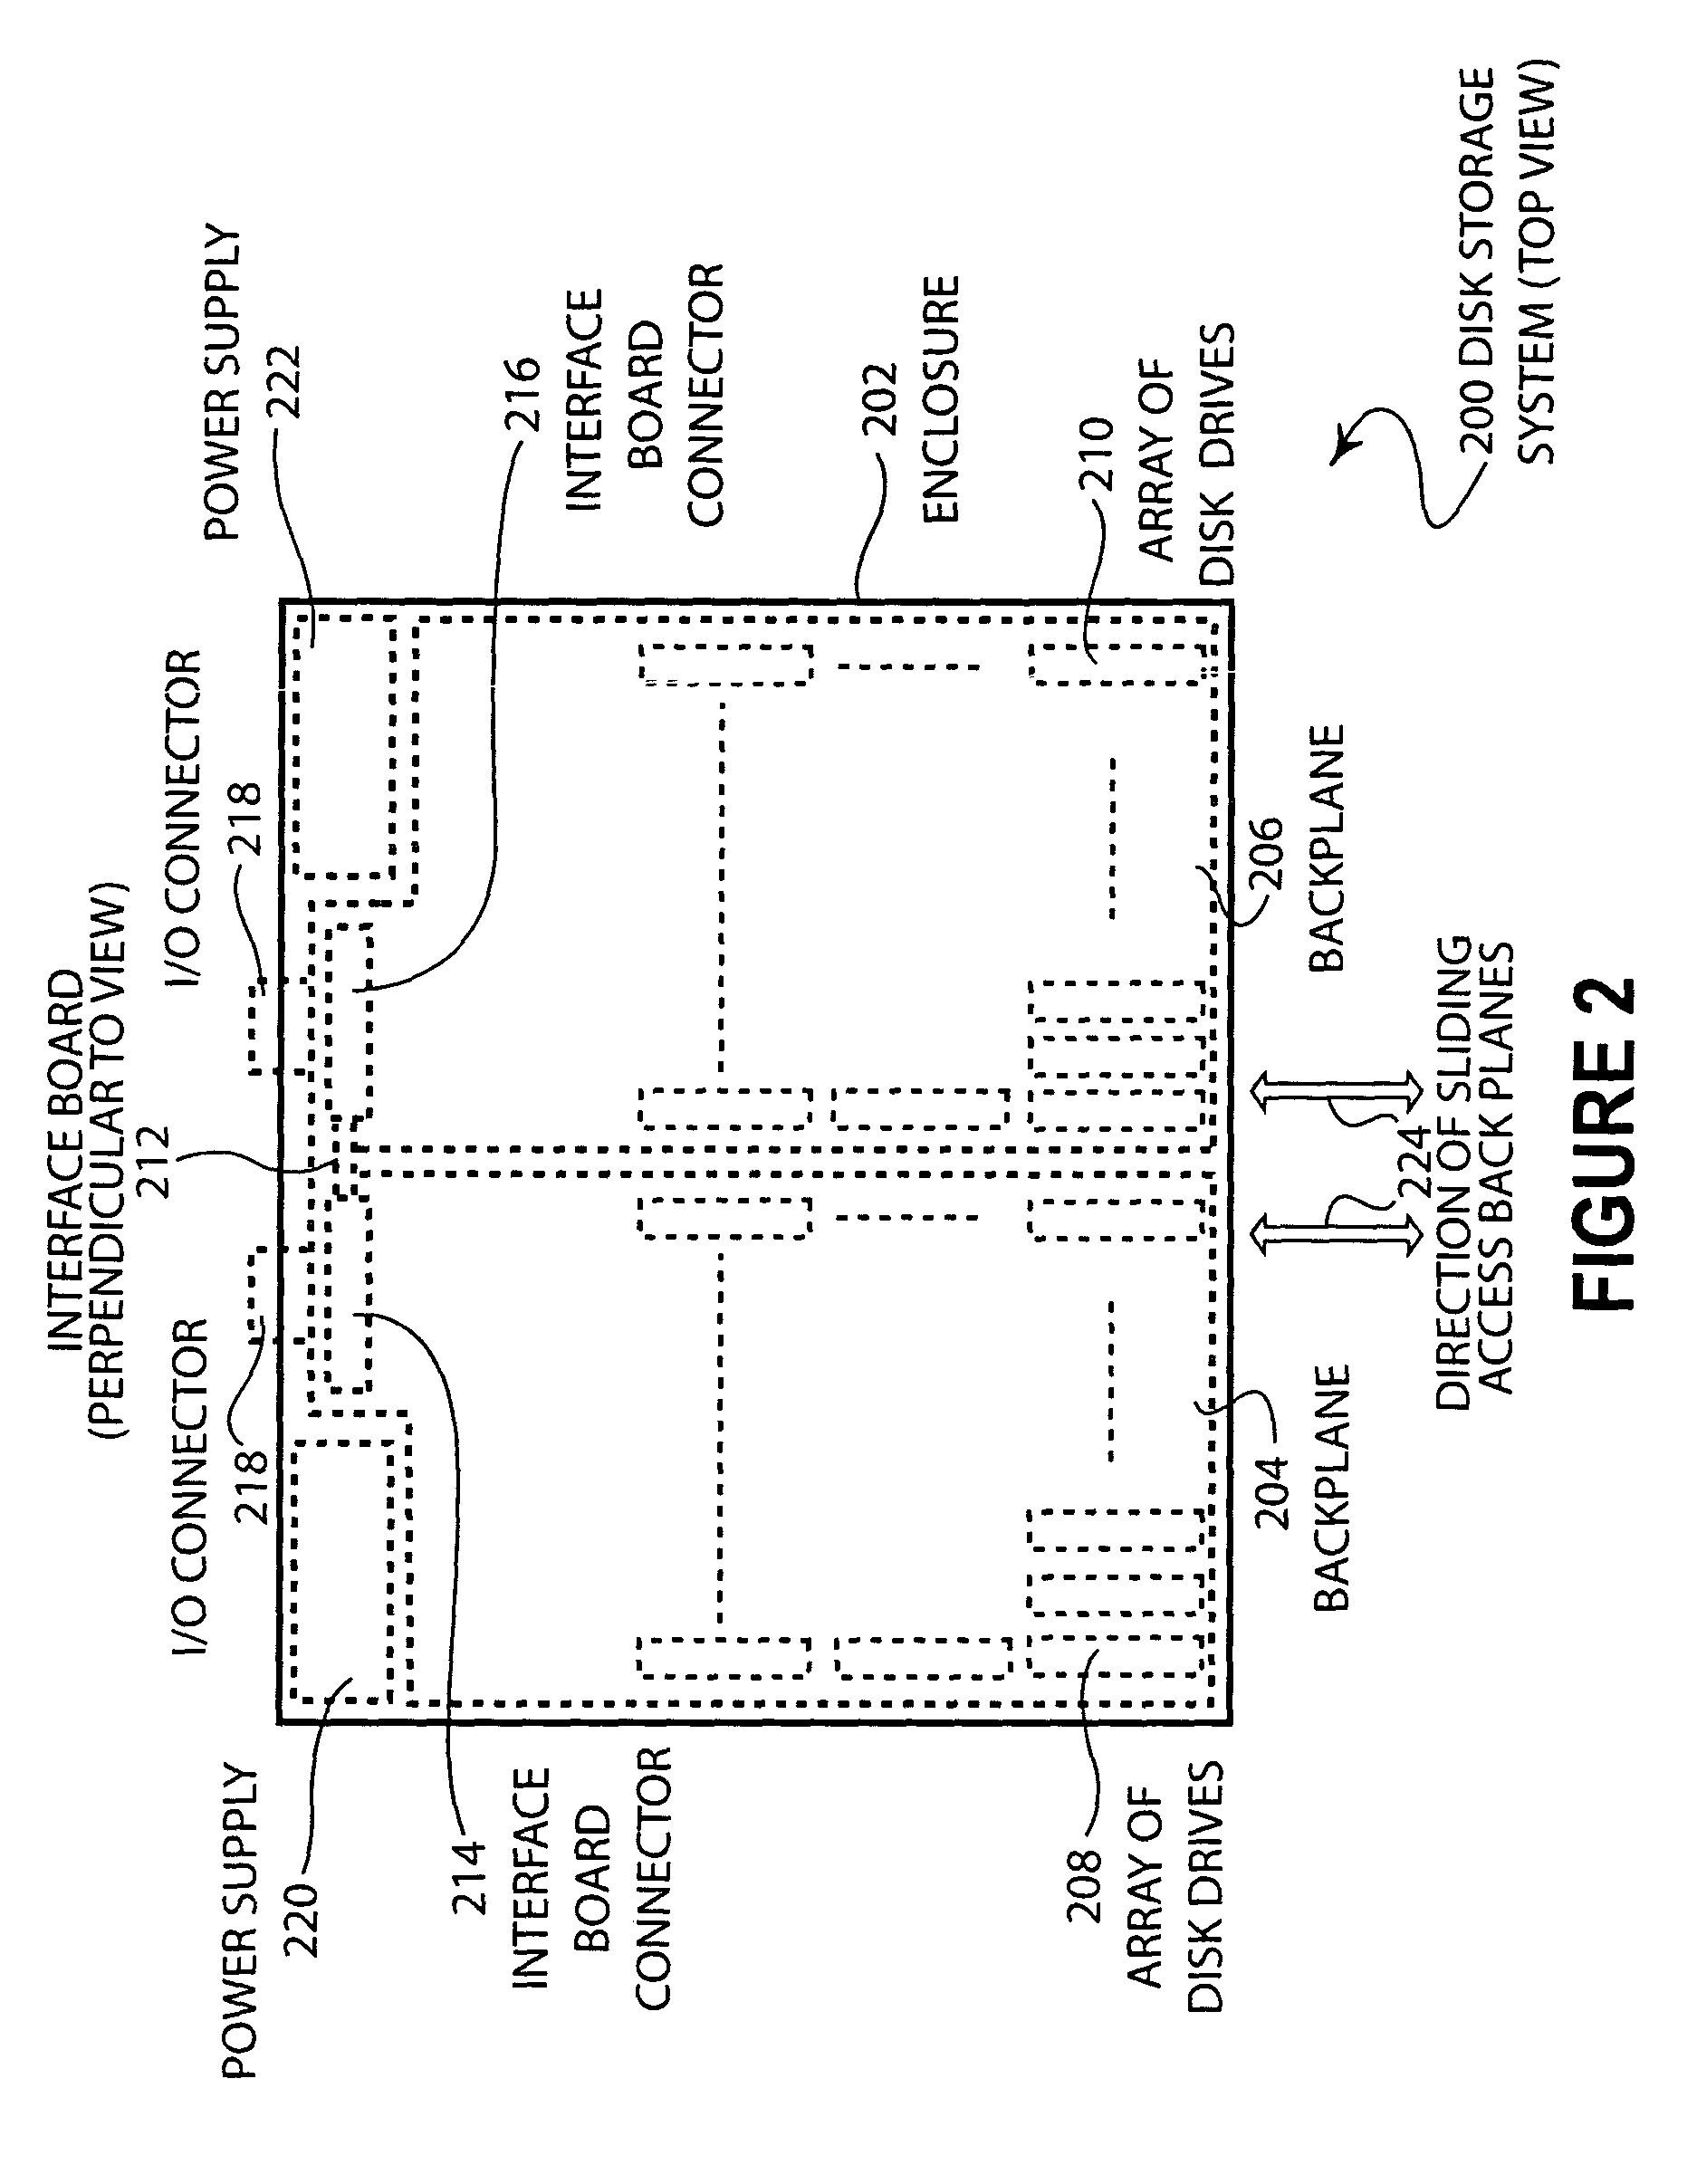 Disk storage system with removable arrays of disk drives